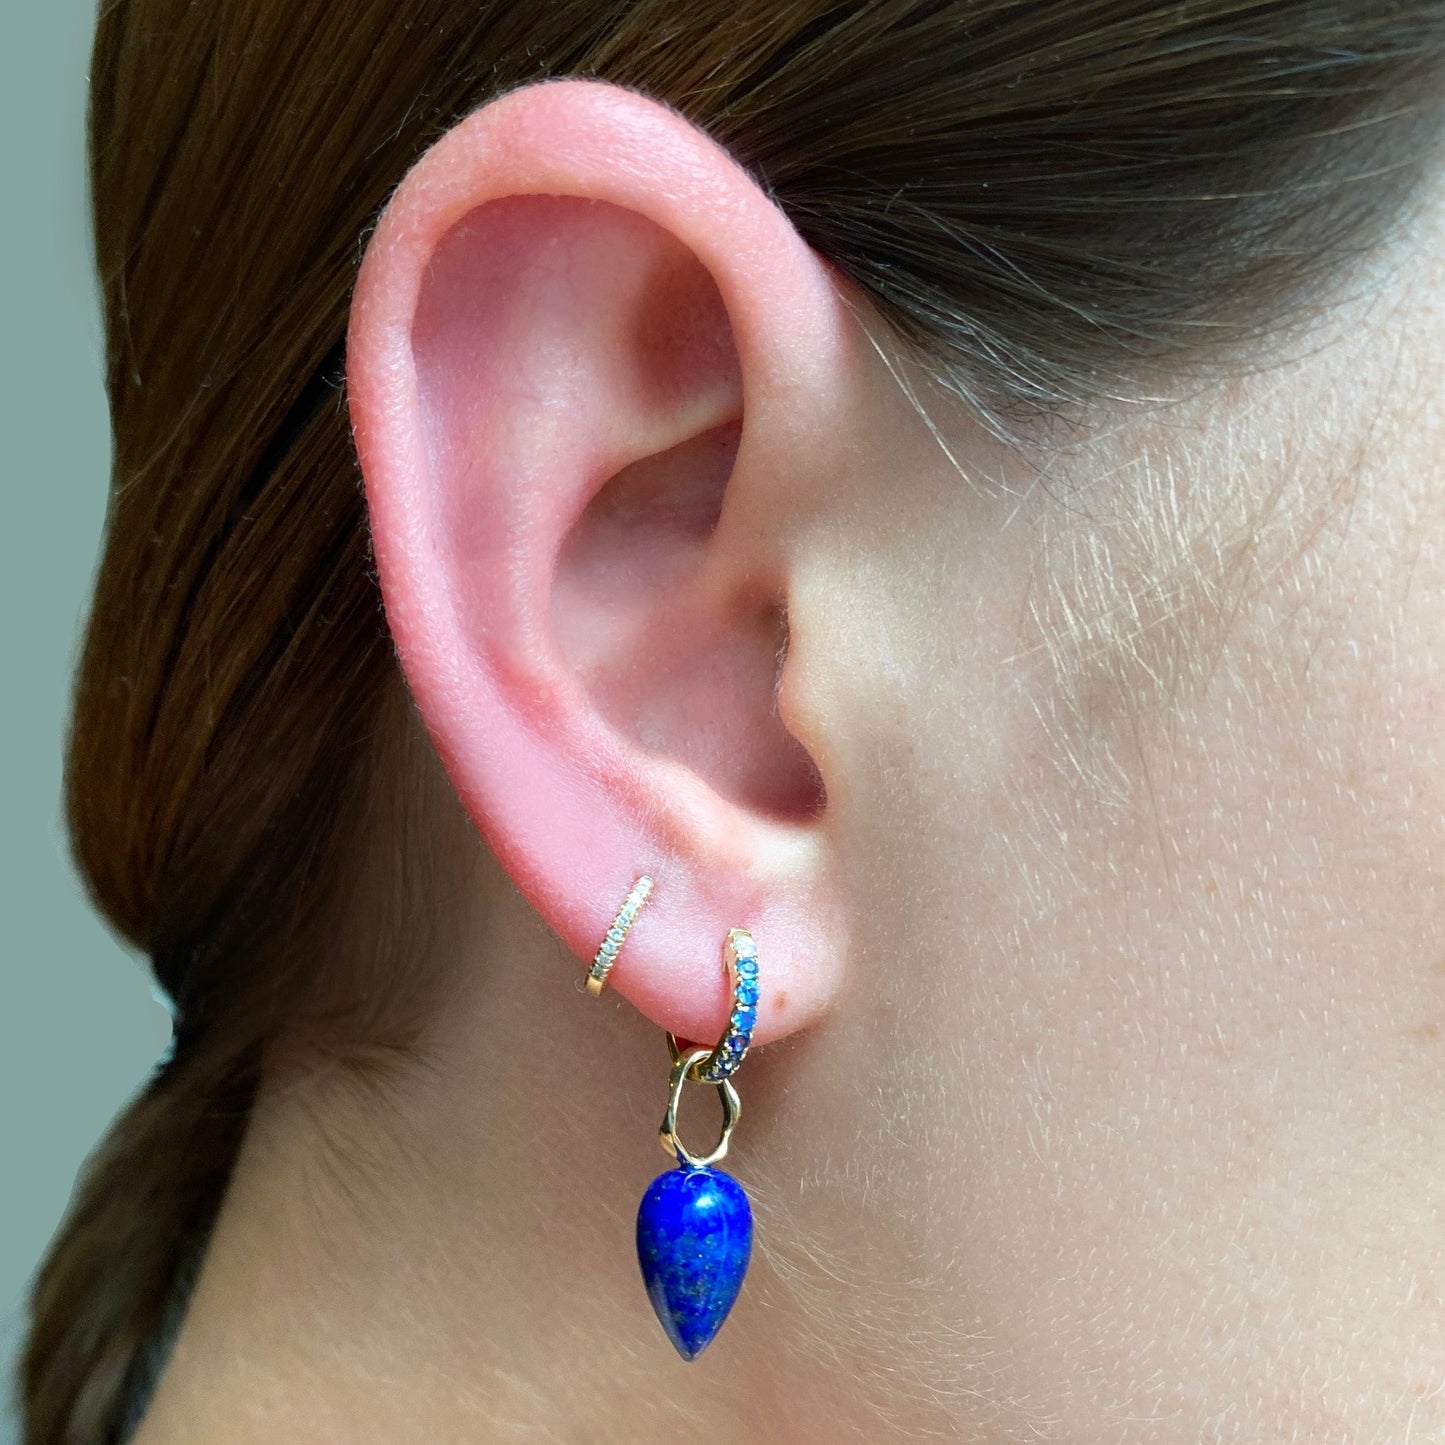 Lapis acorn drop charm. Styled on the ear hanging from a pave hoop.